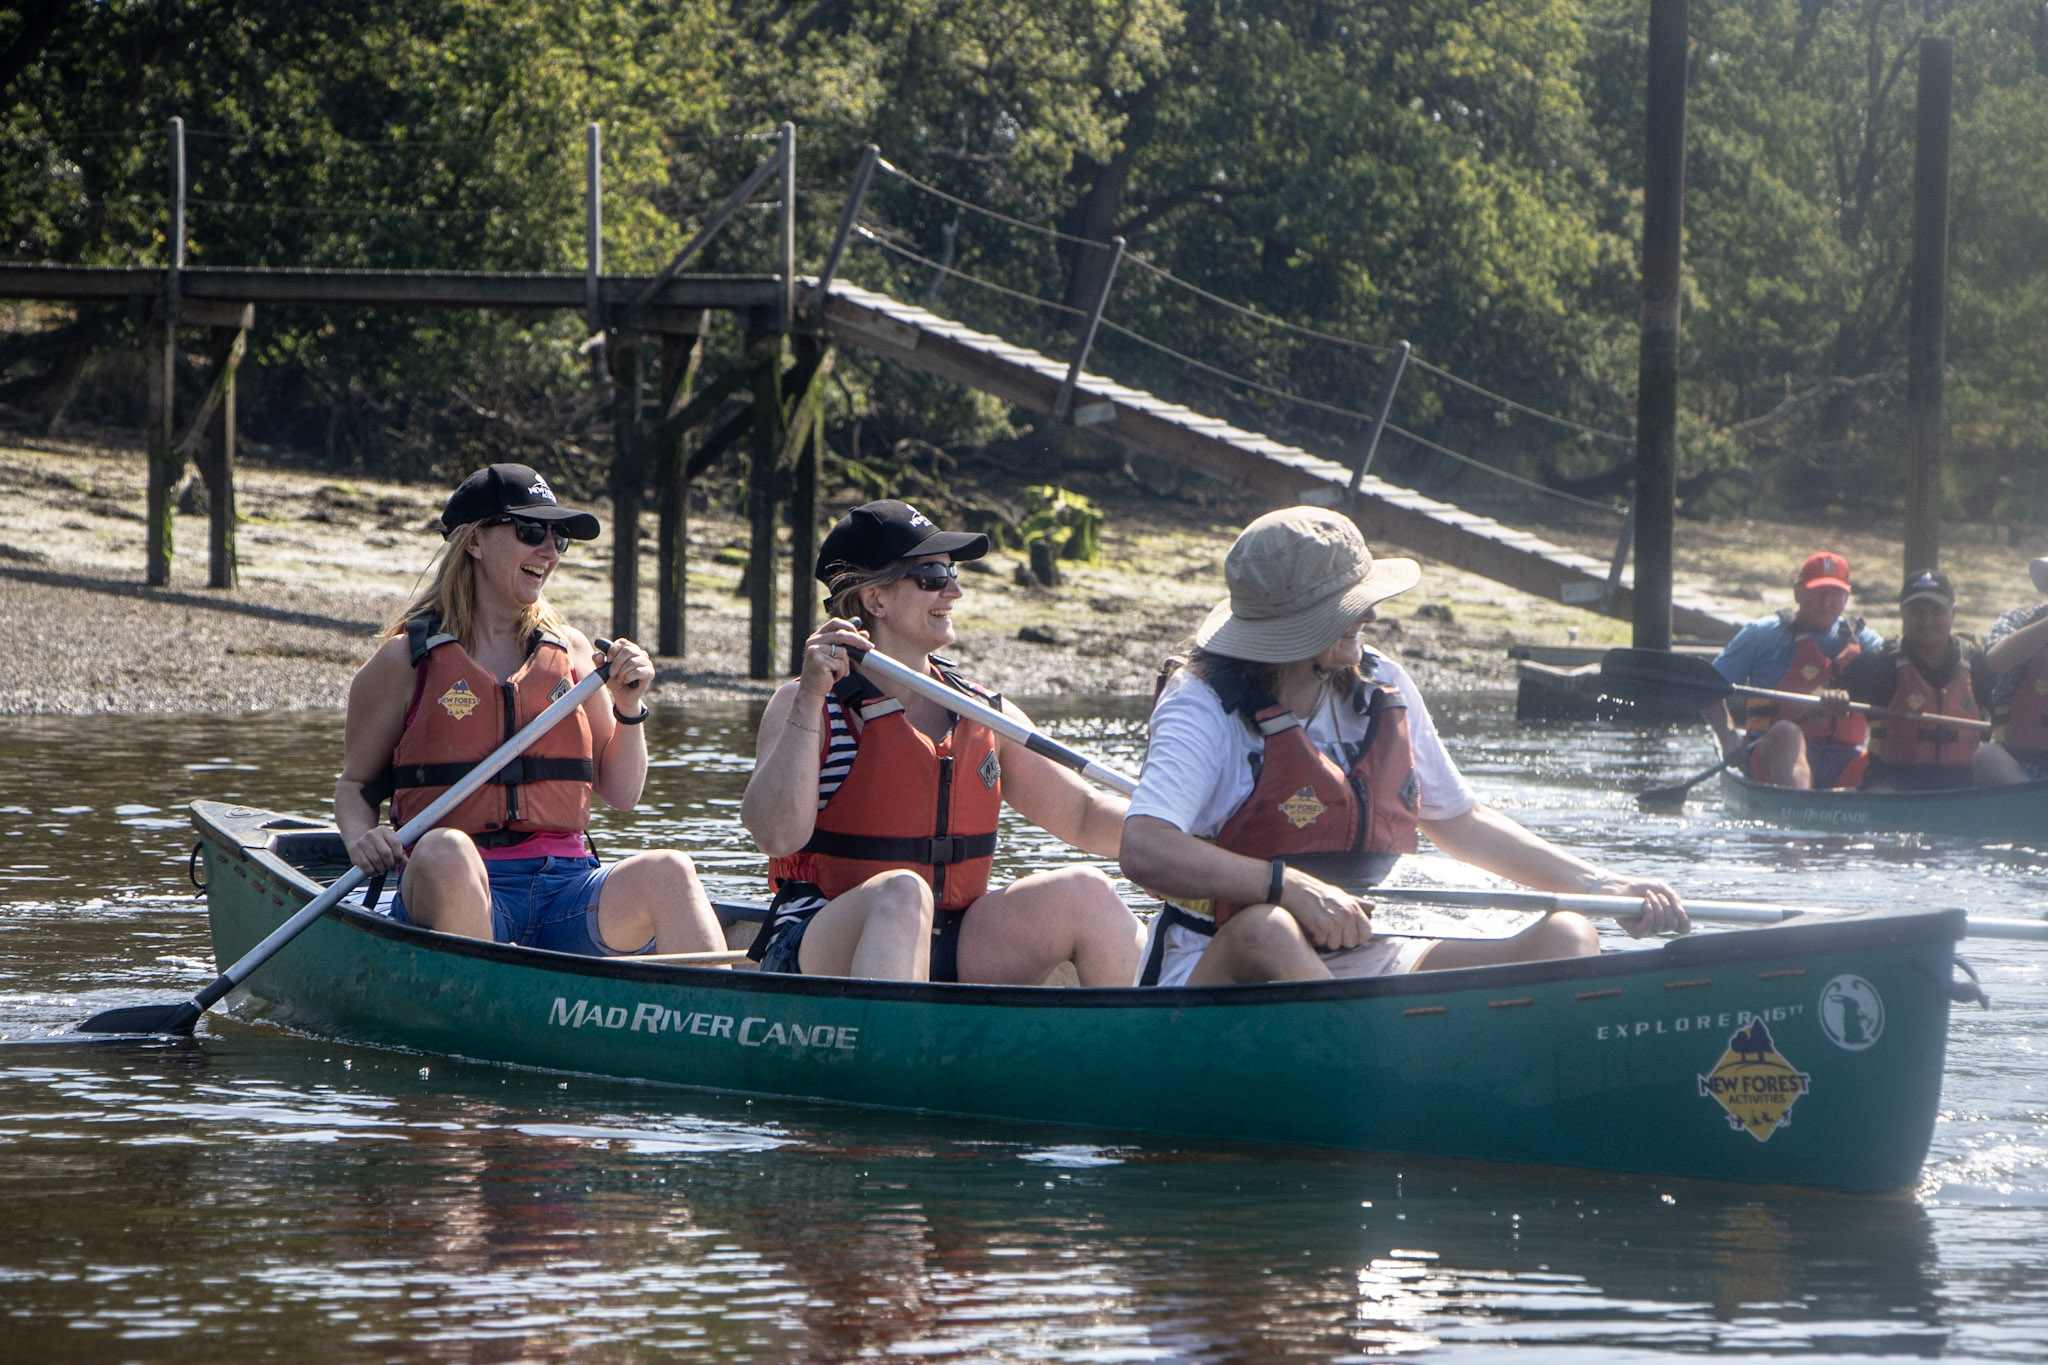 A group of ladies canoeing after looking for fun activities for adults in The New Forest.